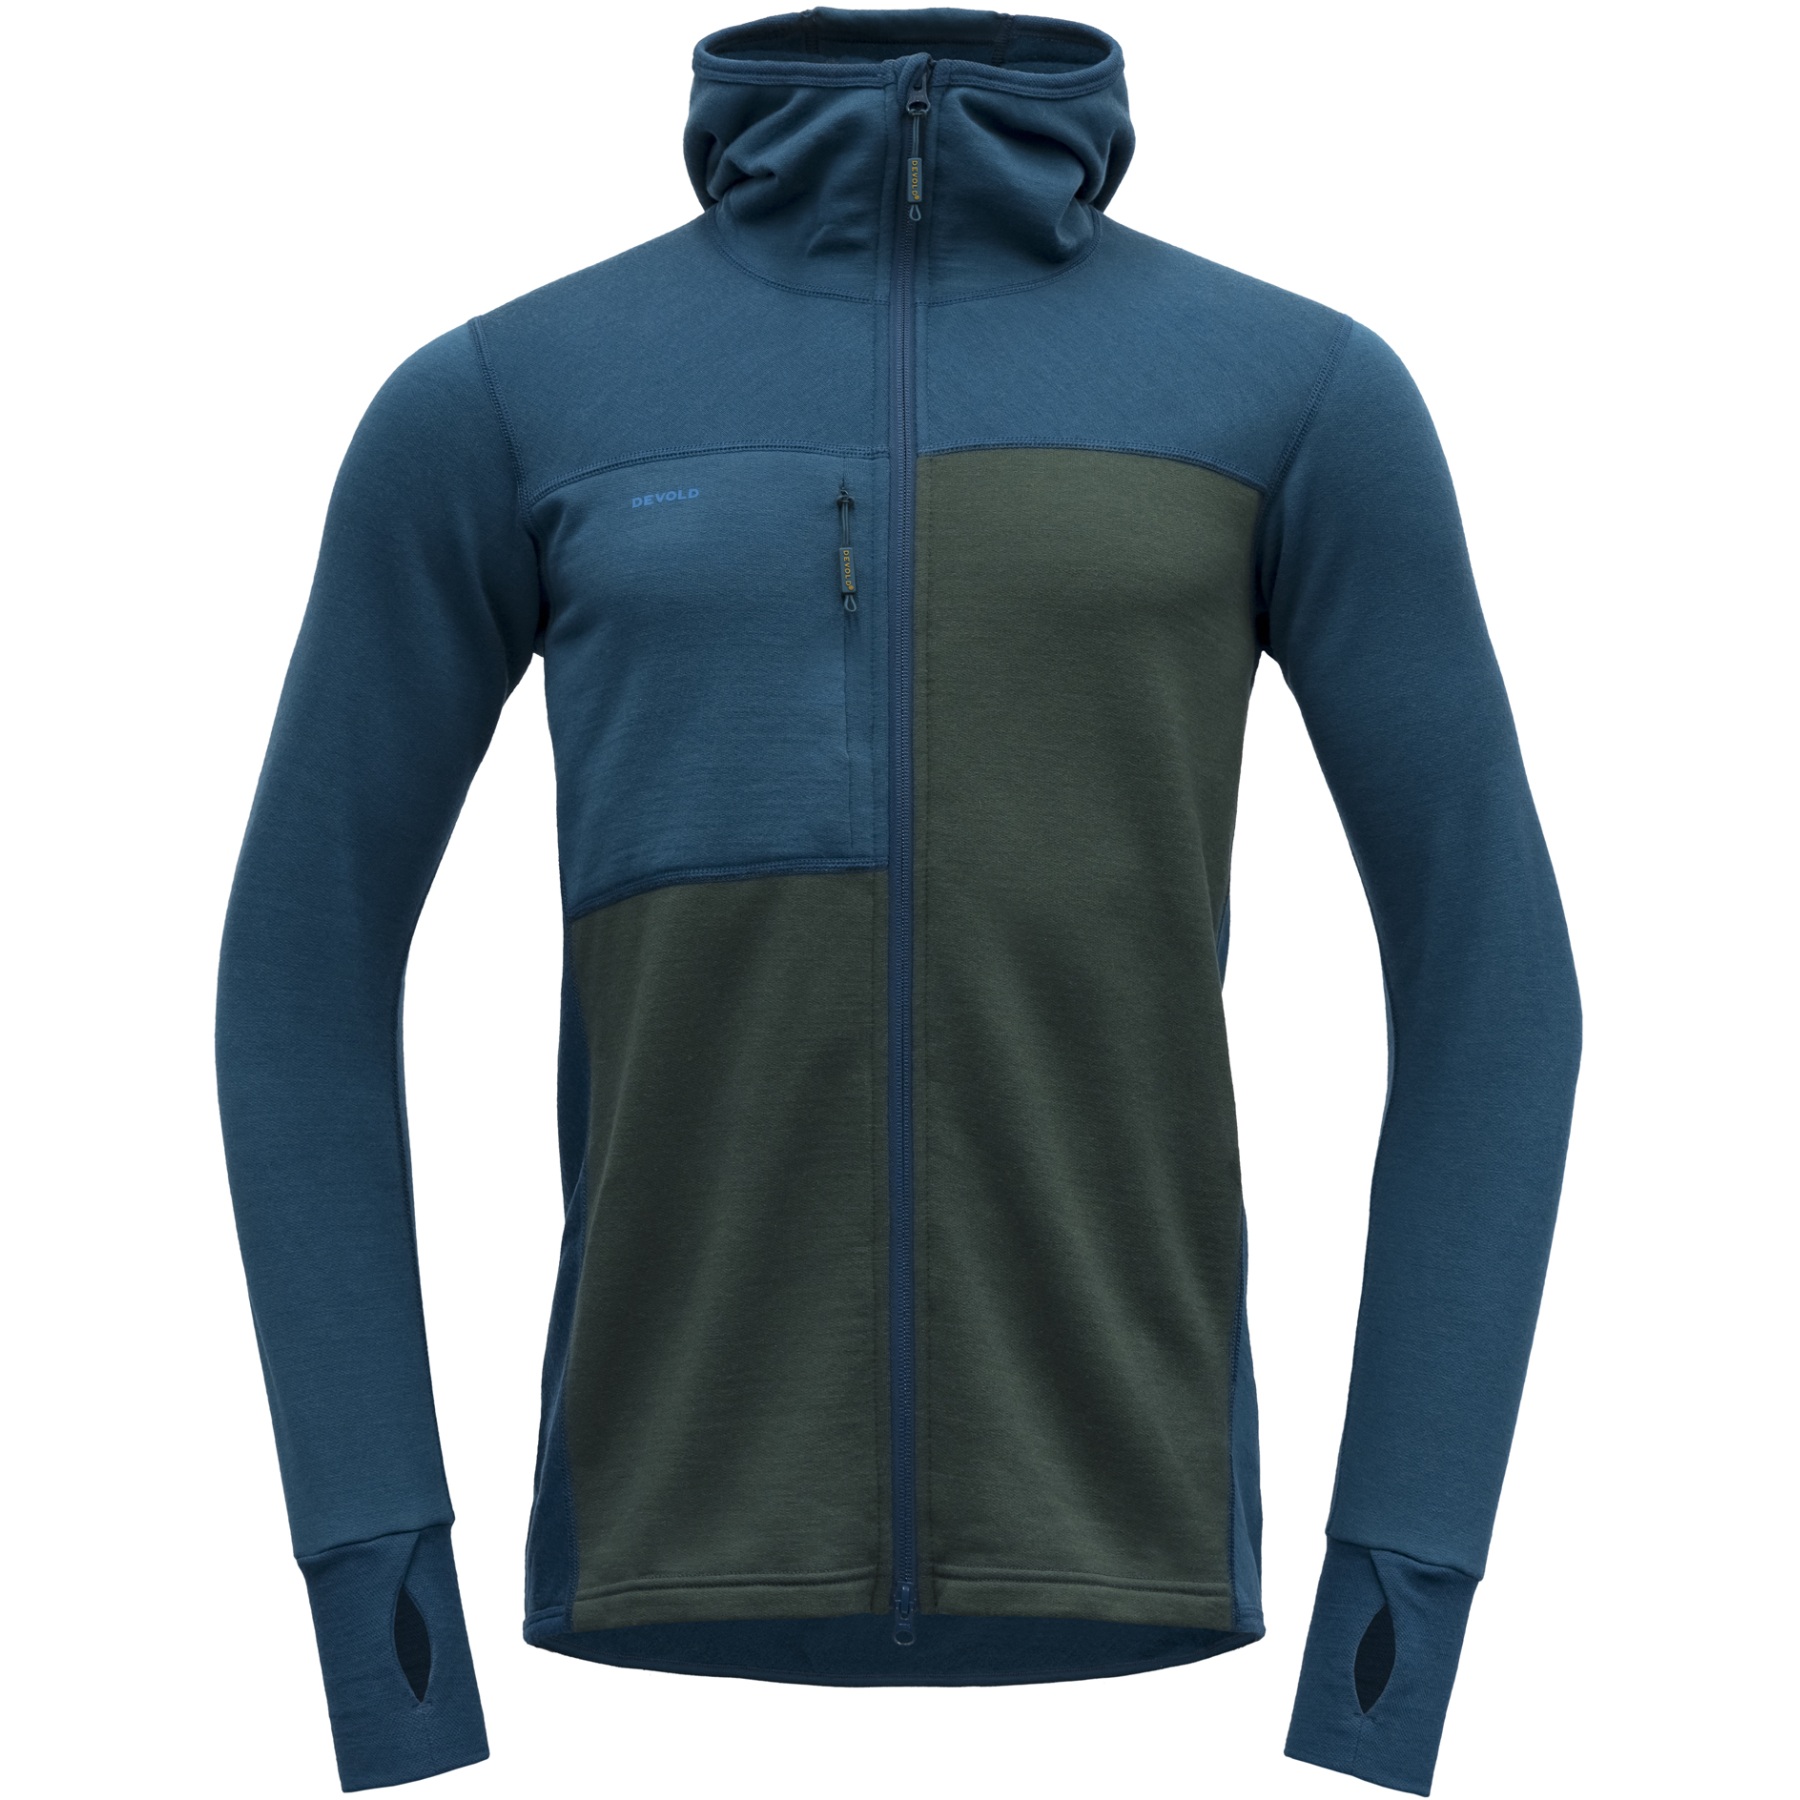 Picture of Devold Nibba Pro Merino Jacket Hood - 422A Flood